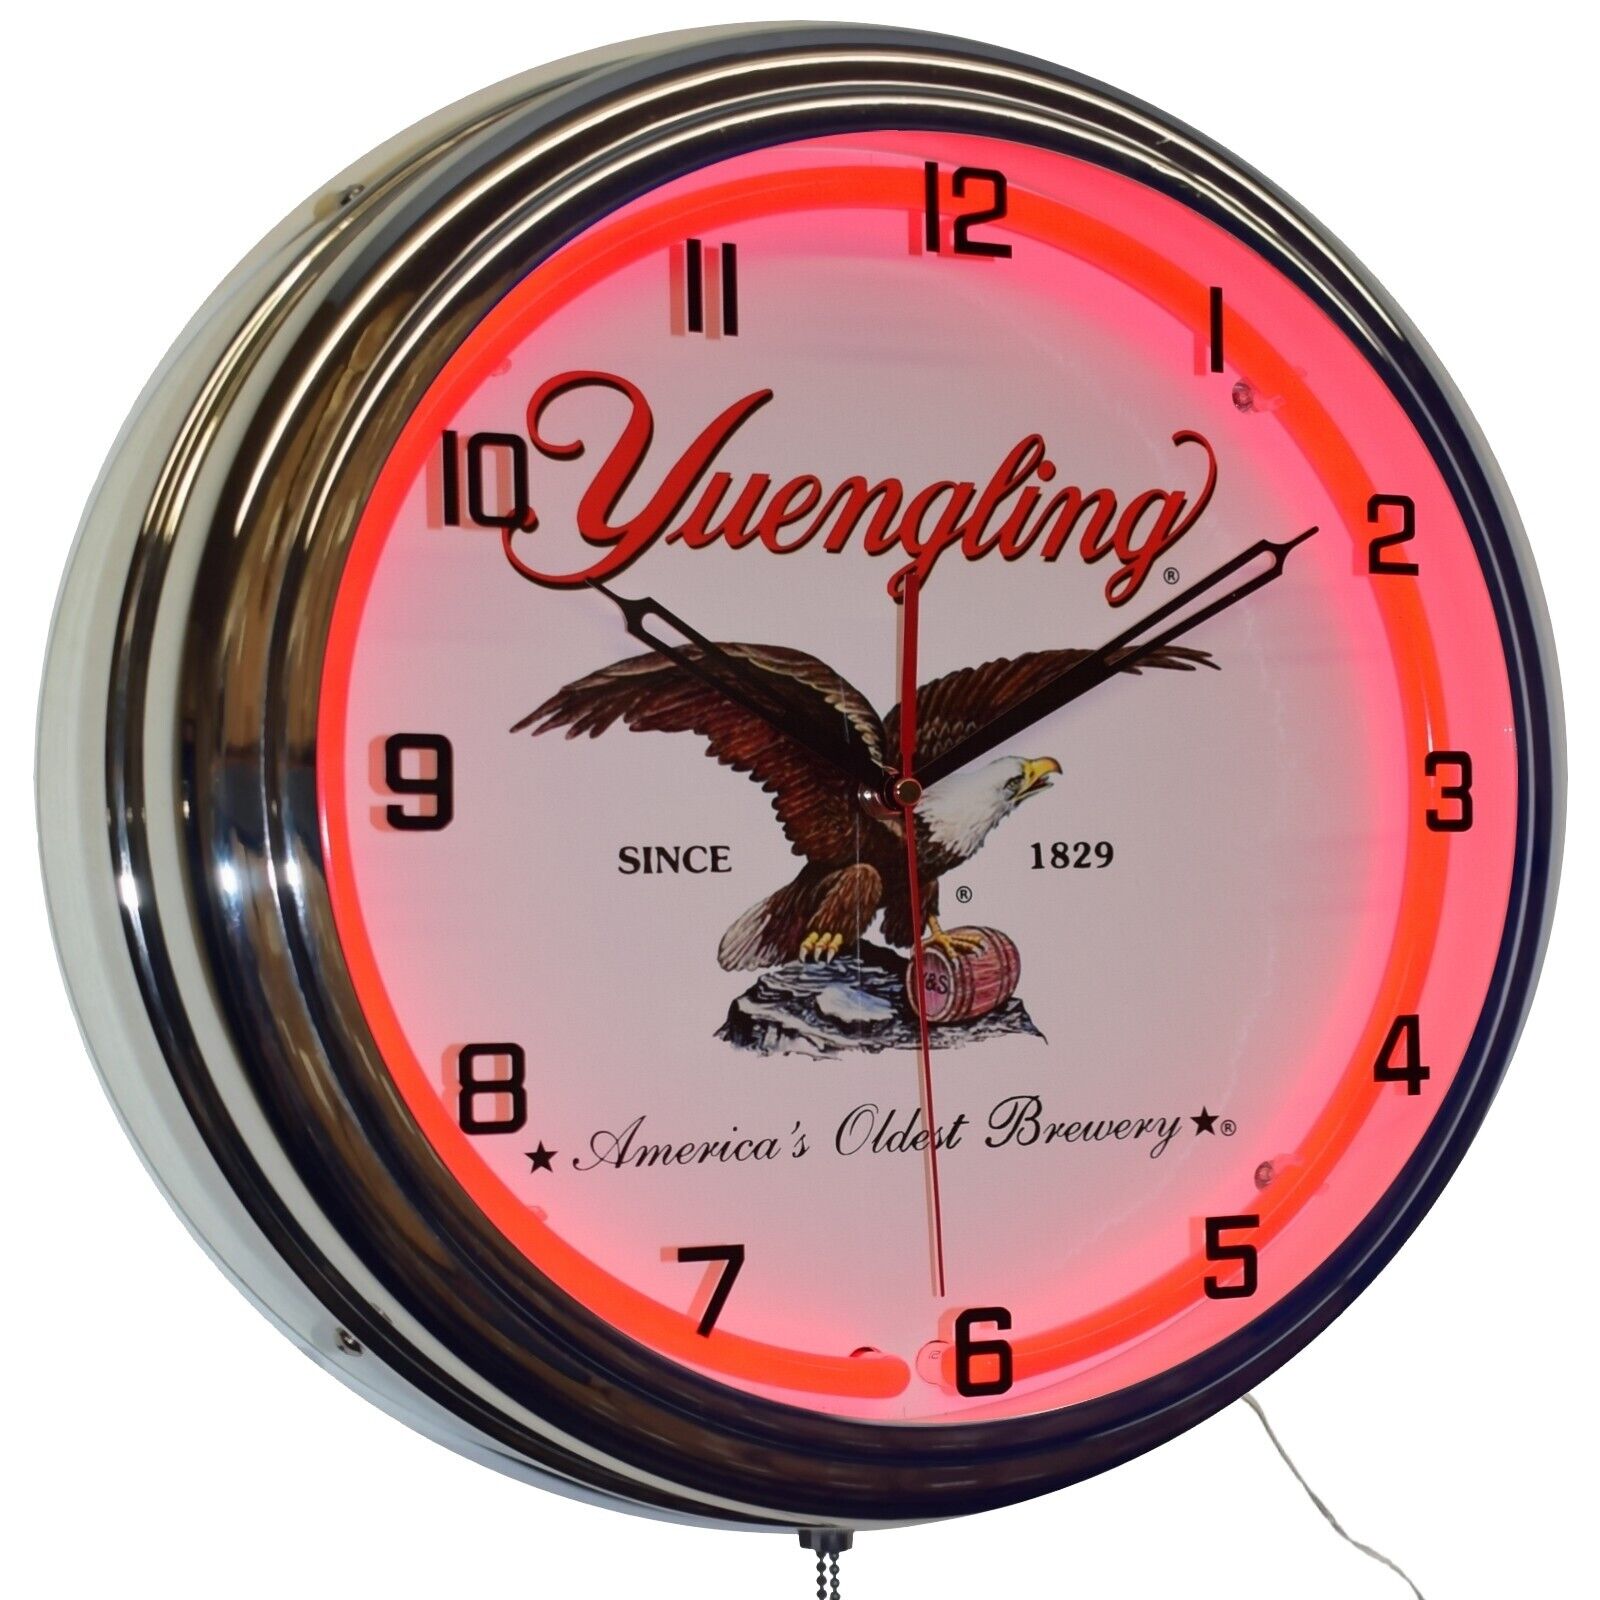 16" Yuengling America's Oldest Brewery Since 1829 Neon Clock Bar Decor (Red) Yuengling